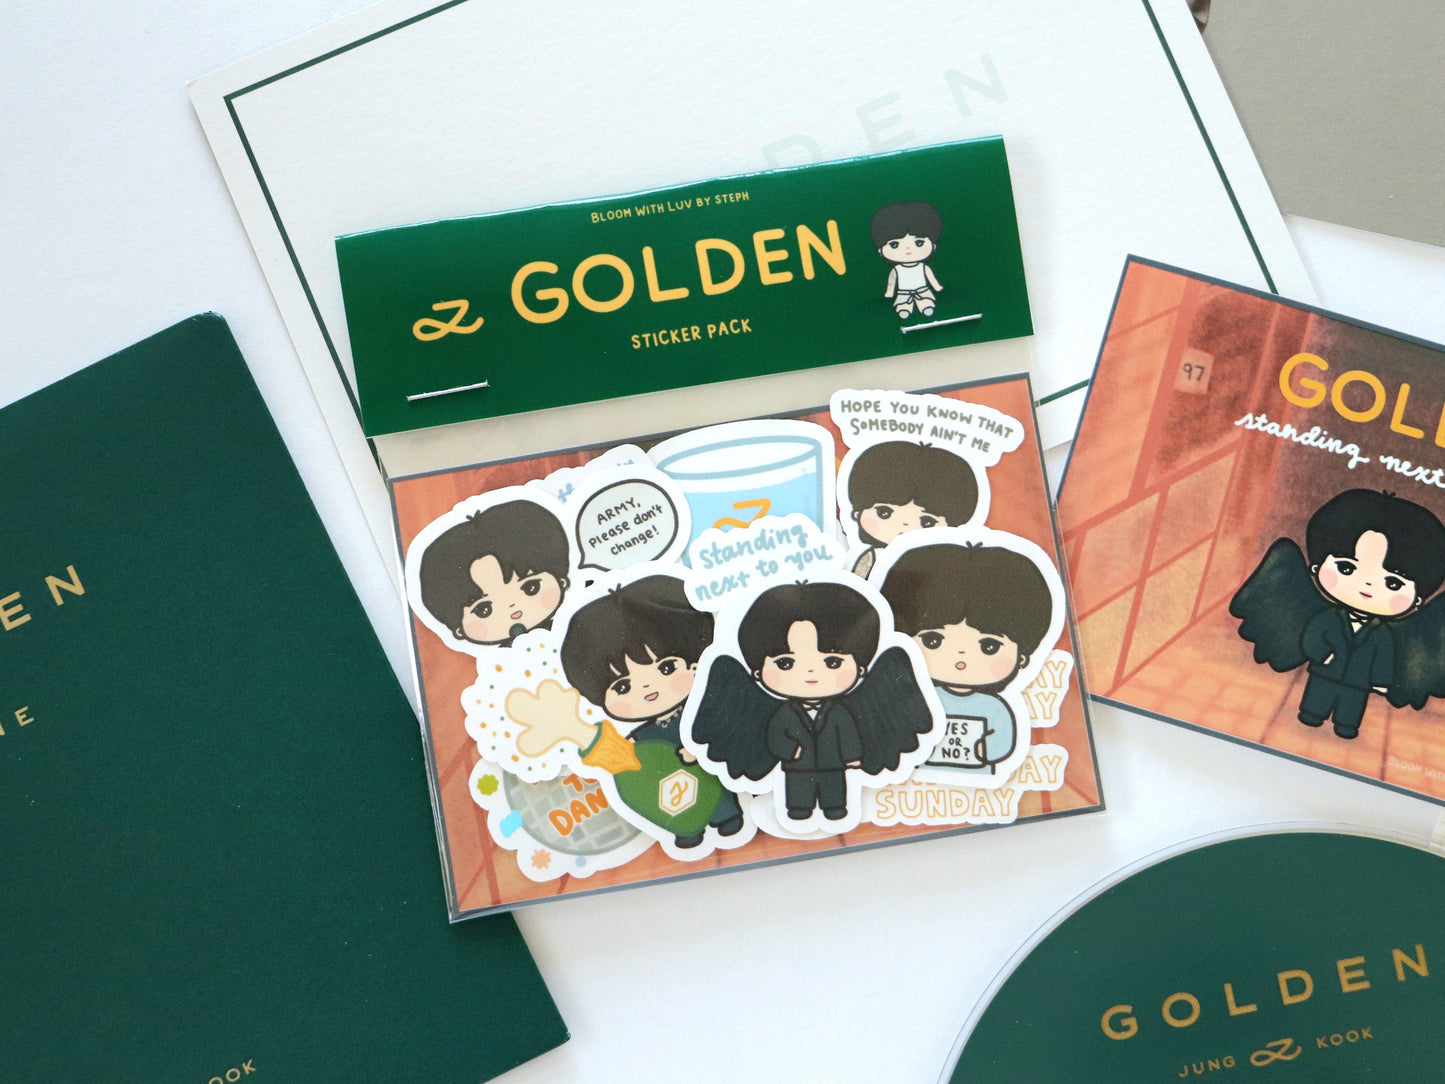 Golden Jungkook Sticker Pack – Bloom With Luv